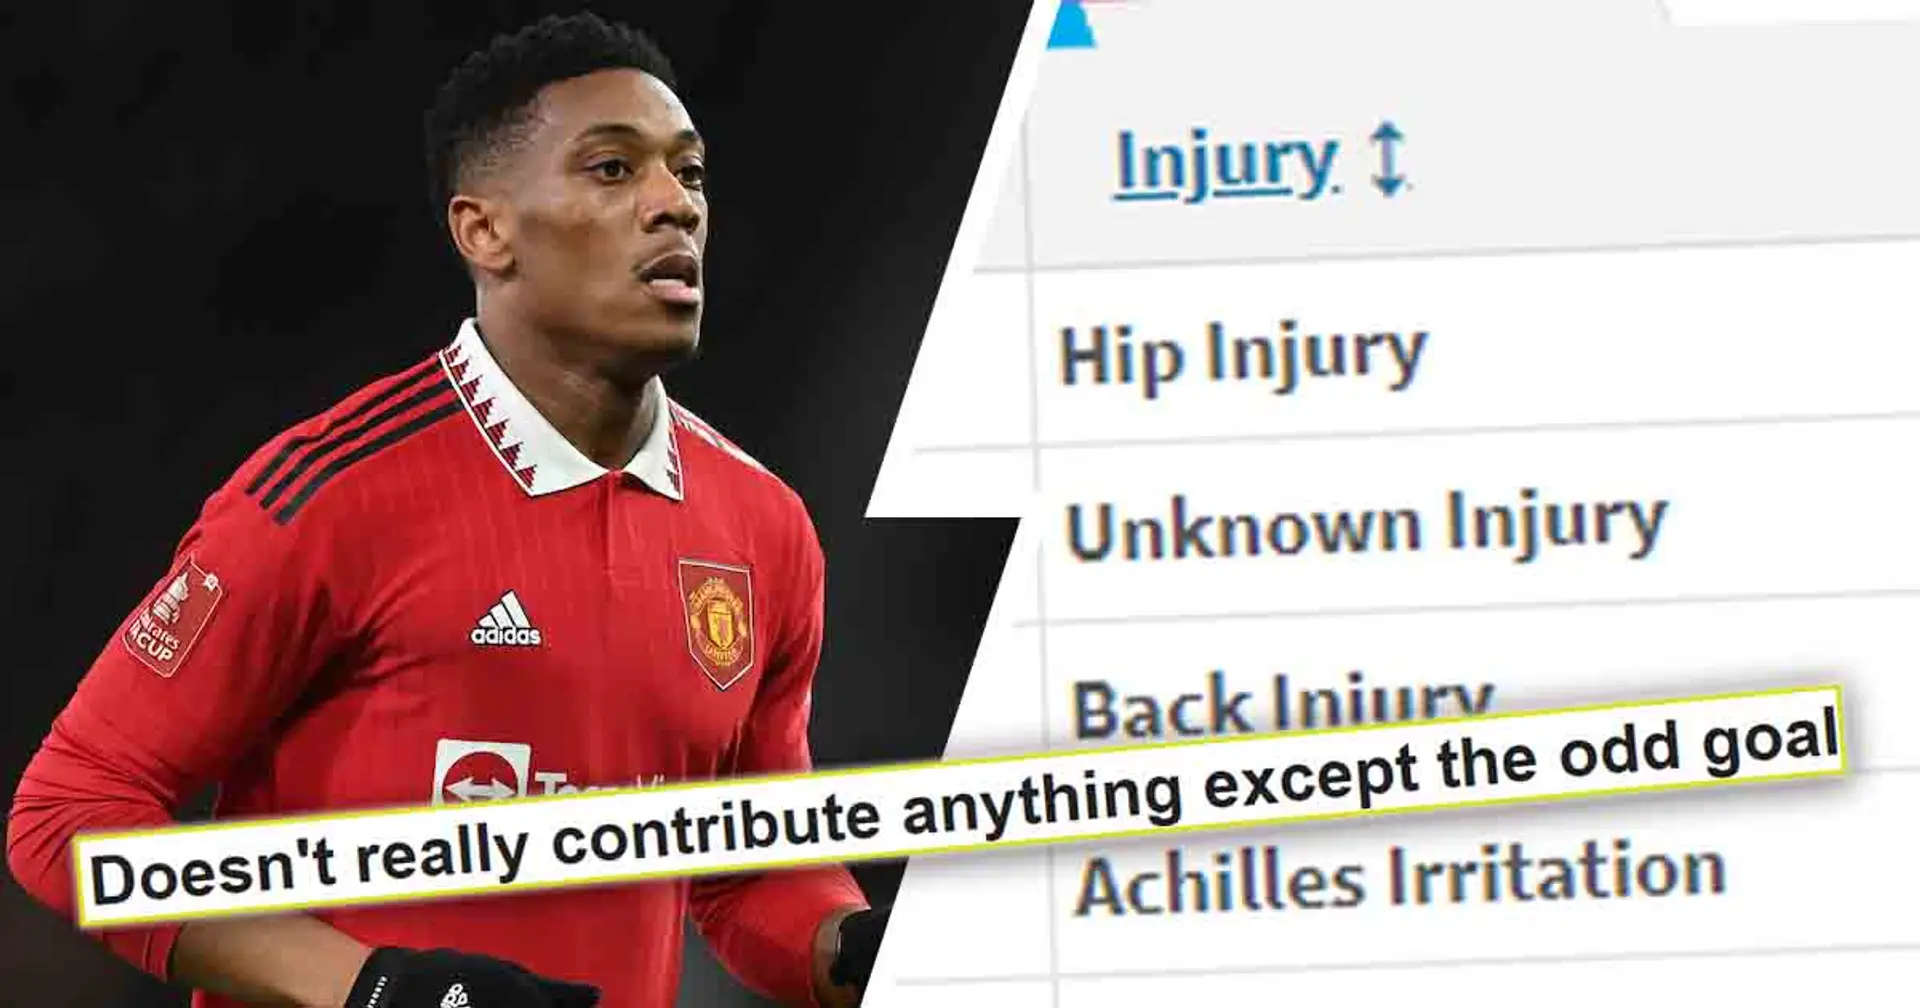 'Is he a player or member of the medical team?’: Man United fans give clear verdict on Martial's future